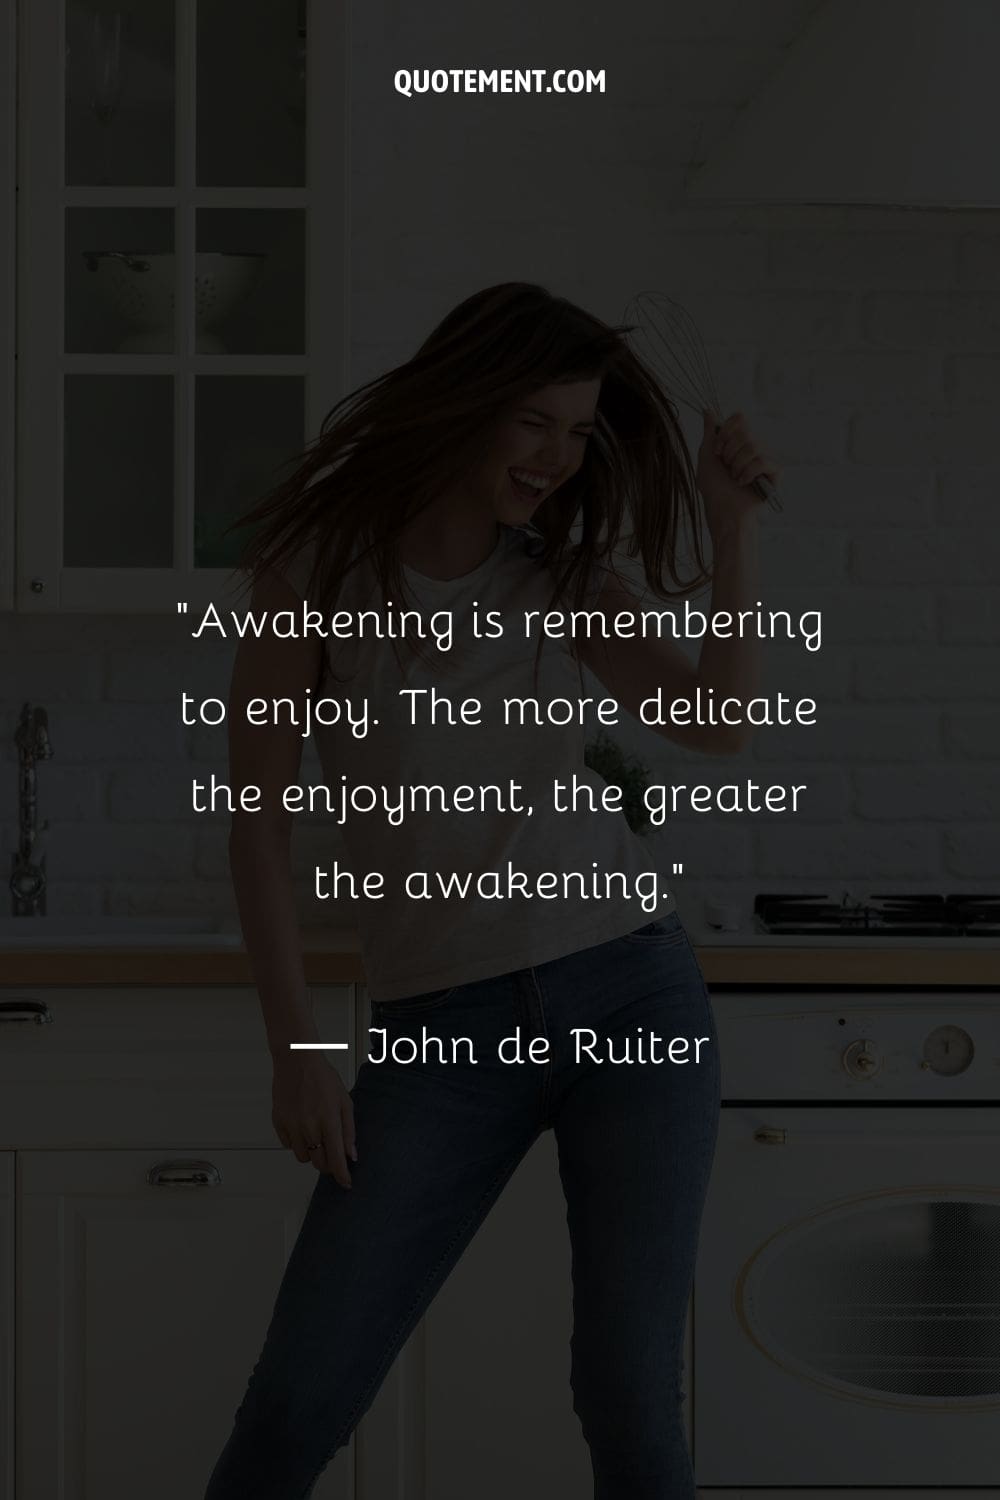 Awakening is remembering to enjoy. The more delicate the enjoyment, the greater the awakening.